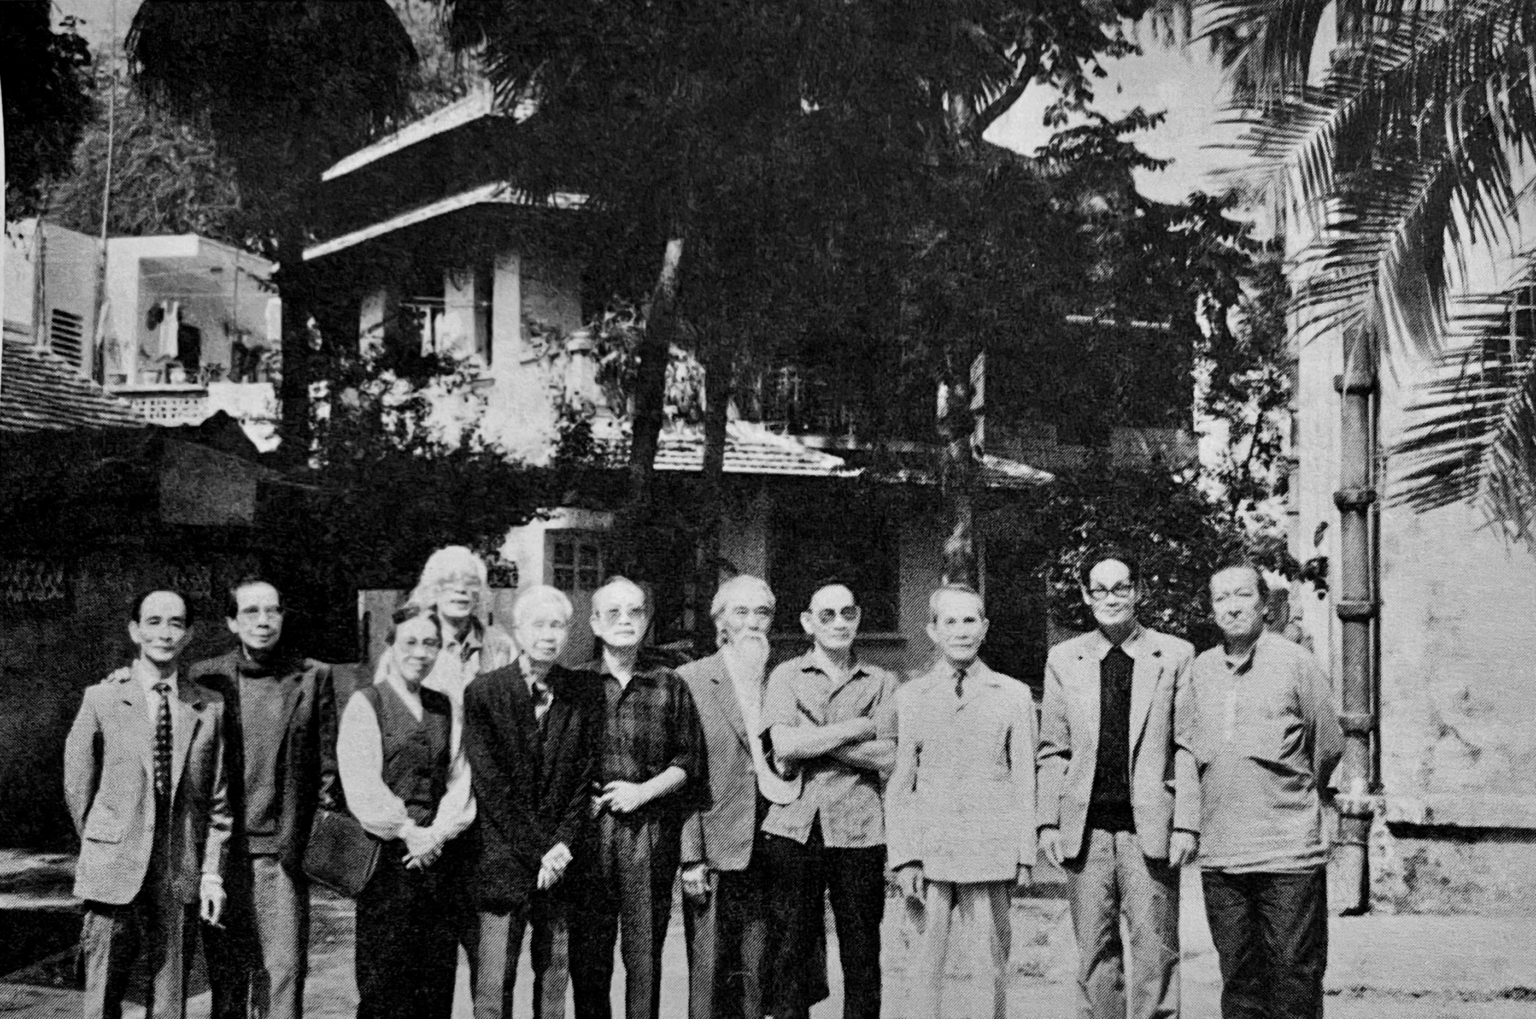 Painters. former students at the Fine Arts College of Indochina (from left to right): Phan Ke An, Nguyen Trong Hop, Nguyen Thi Kim, Pham Van Don, Nguyen Van Binh Ta Thuc Binh, Huynh Van Thuan, Le Thanh Duc, Luong Xuan Nhi, Nguyen Quang Phong, Mai Van Hien at the Hanoi Fine Ants College in 1993